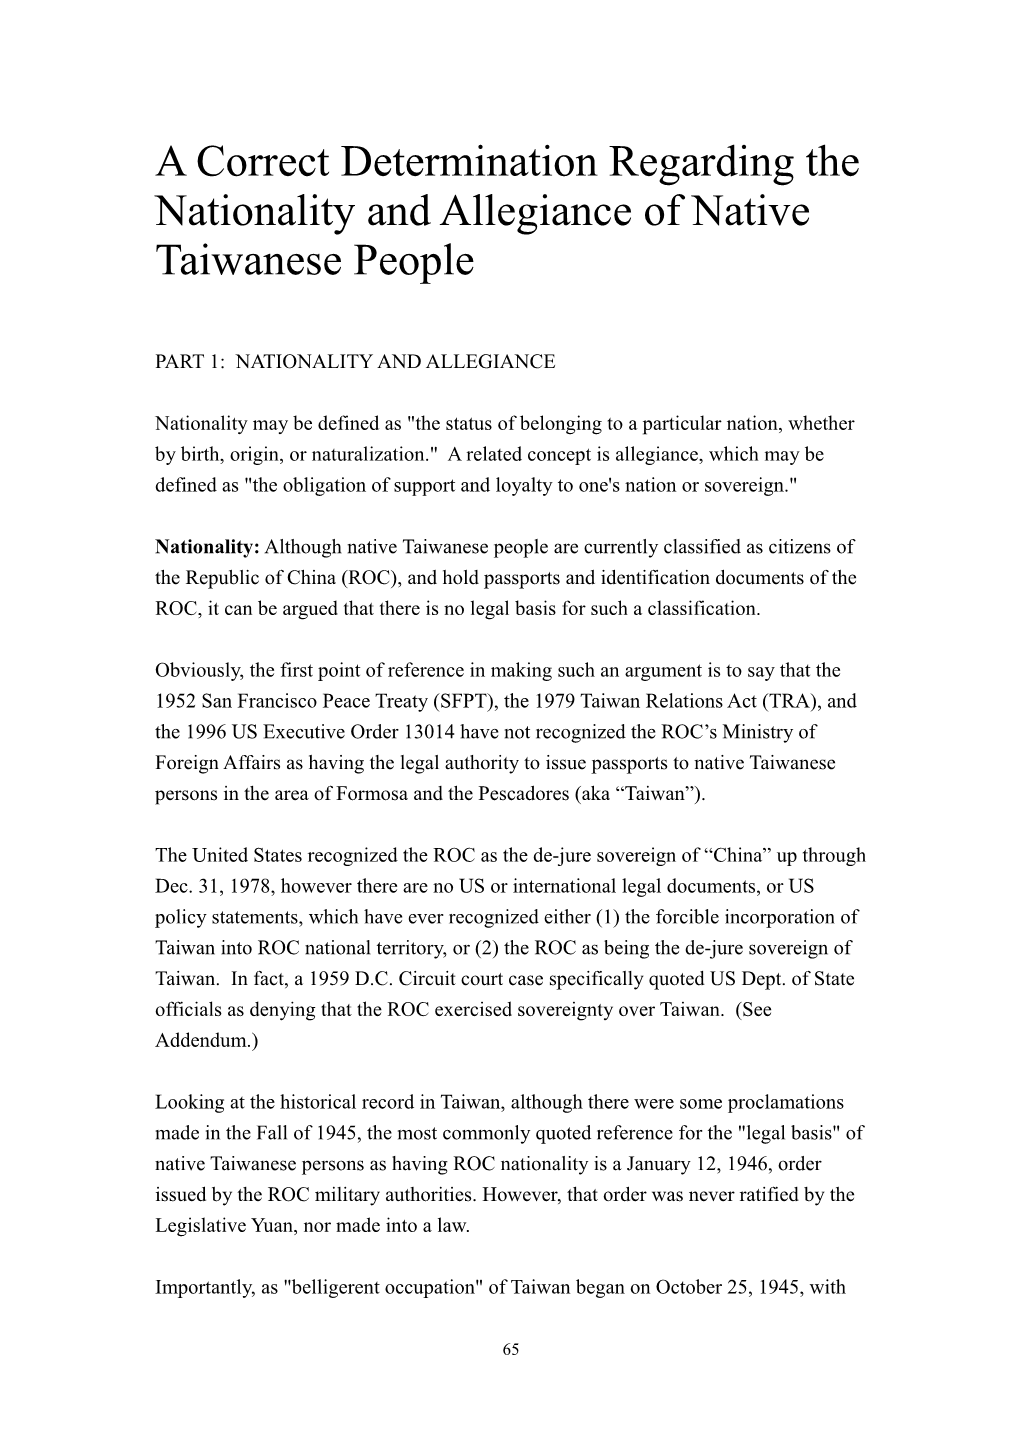 Nationality and Allegiance of Native Taiwanese People